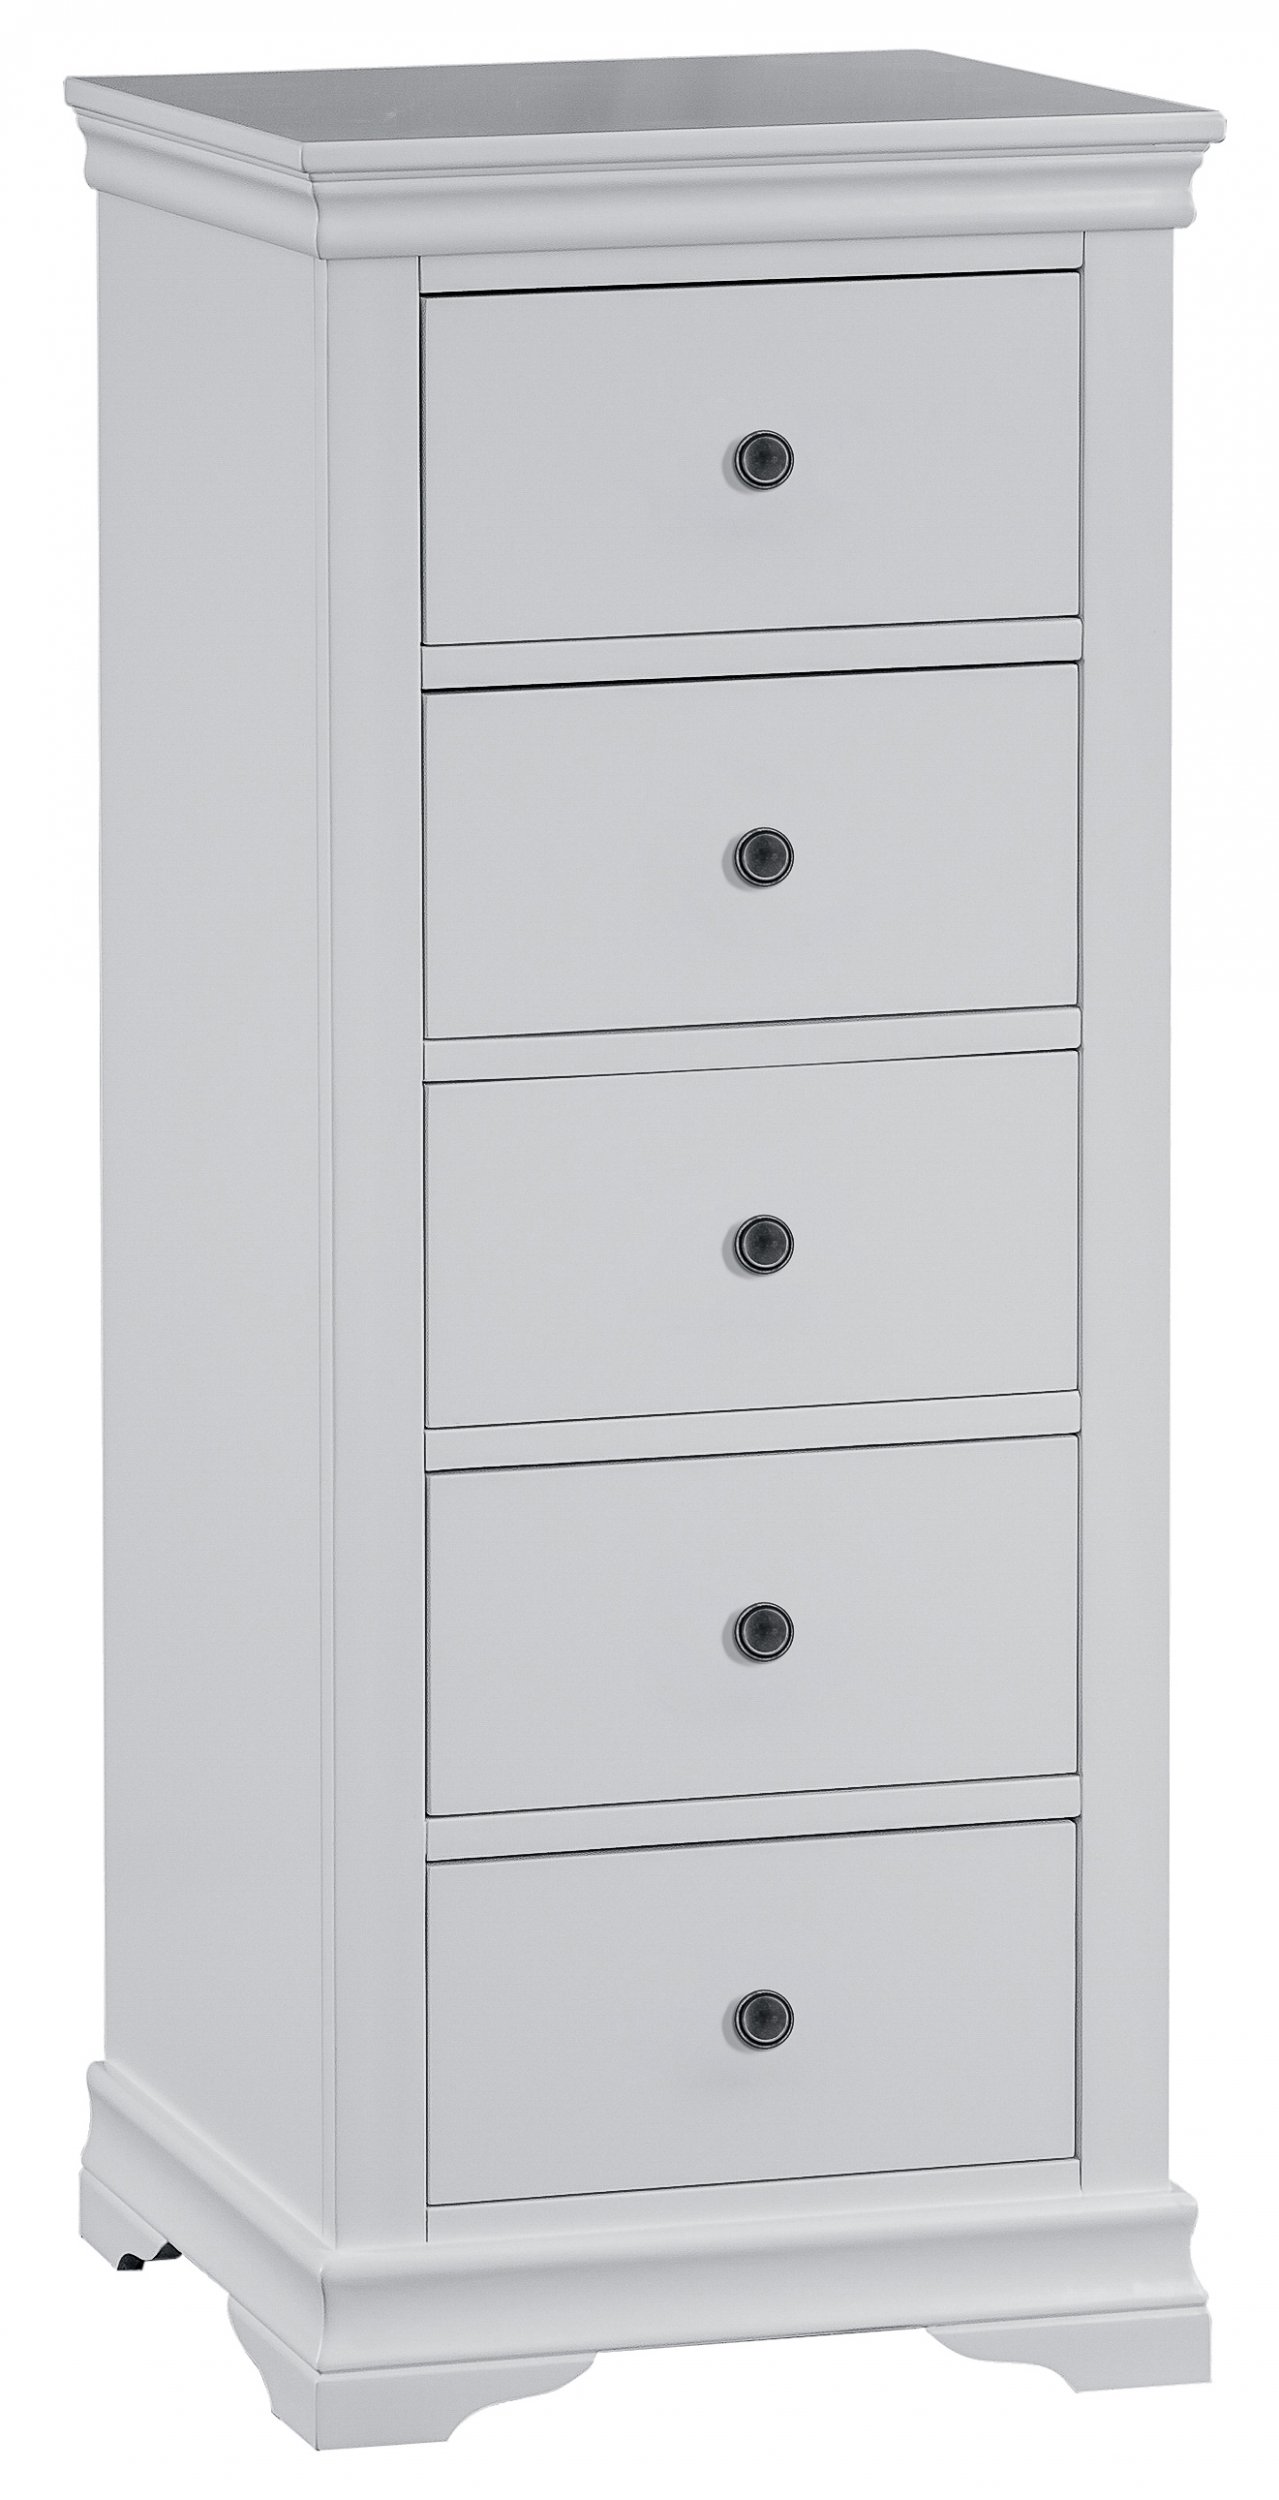 Swanley Grey Bedroom 5 Drawer Narrow Chest | The Clearance Zone